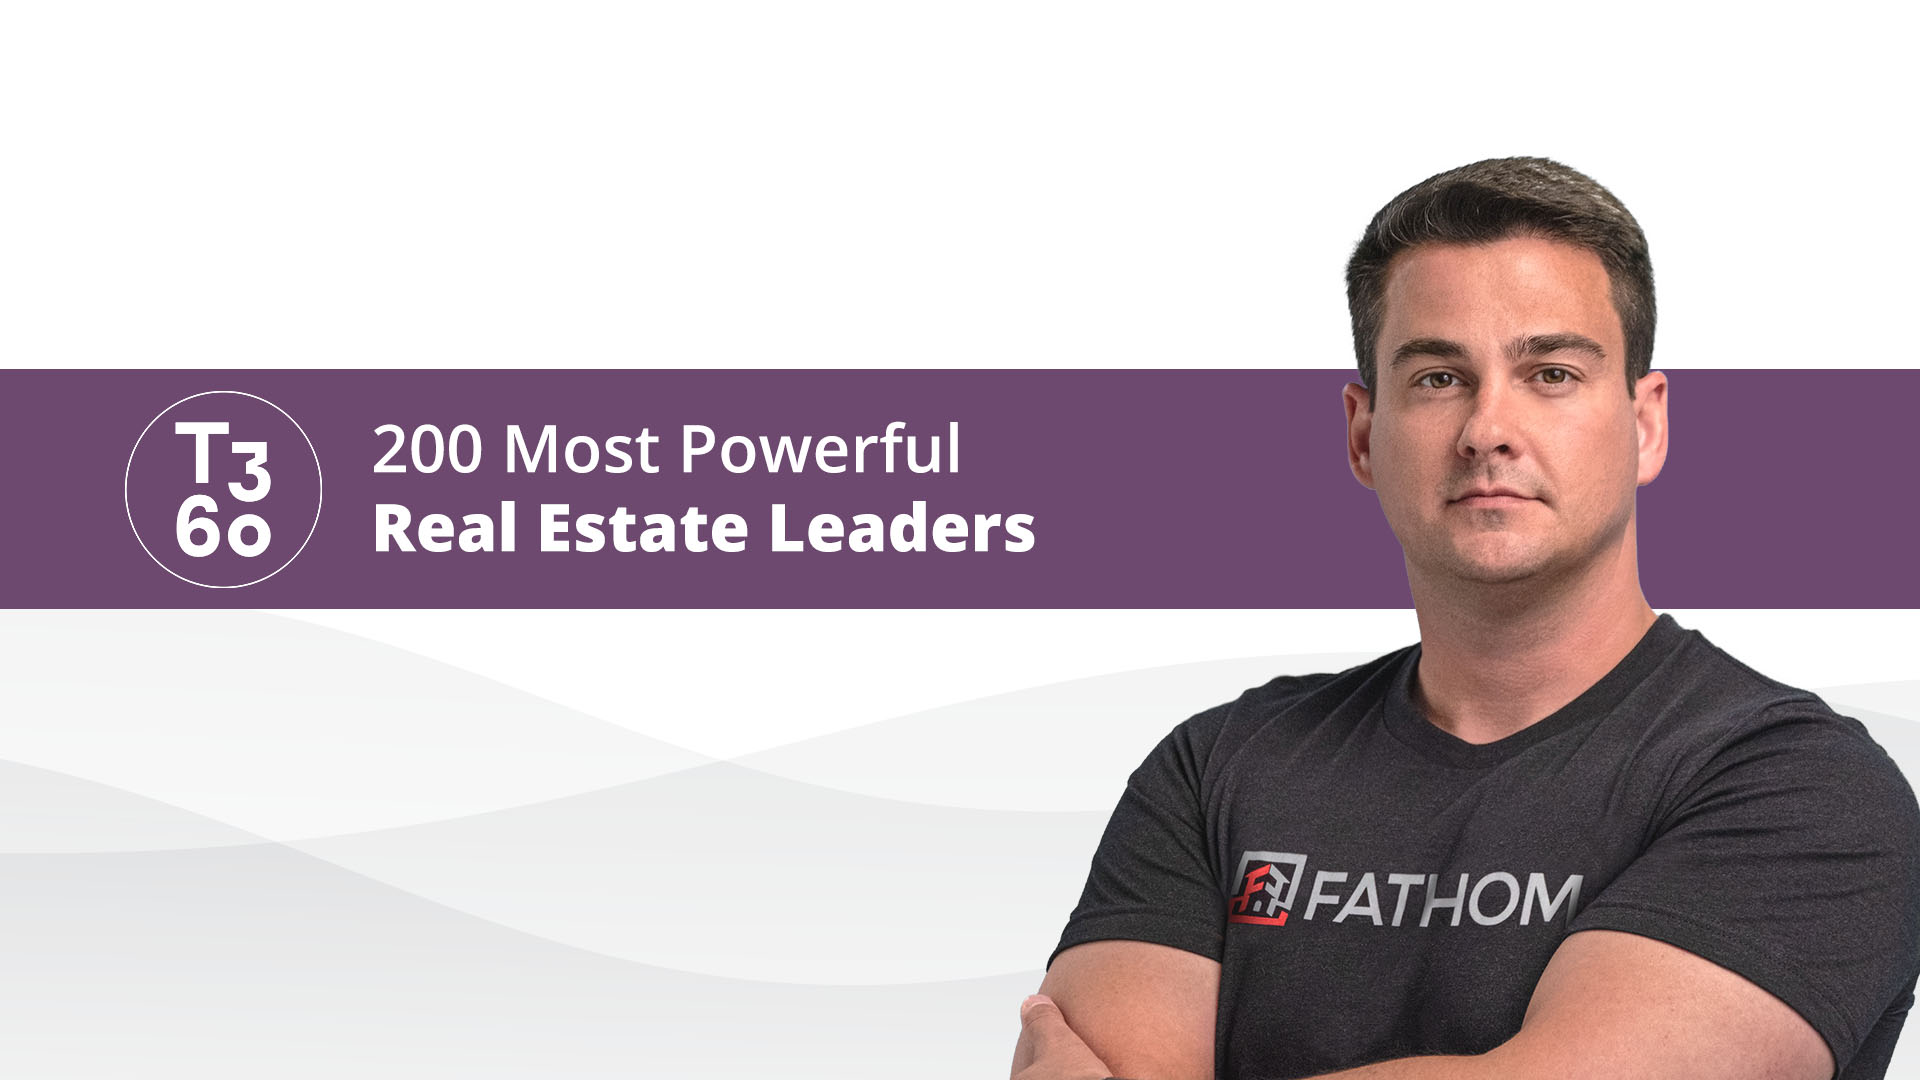 Featured image for “Fathom’s CEO Josh Harley Ranked Among the 200 Most Powerful Real Estate Leaders”